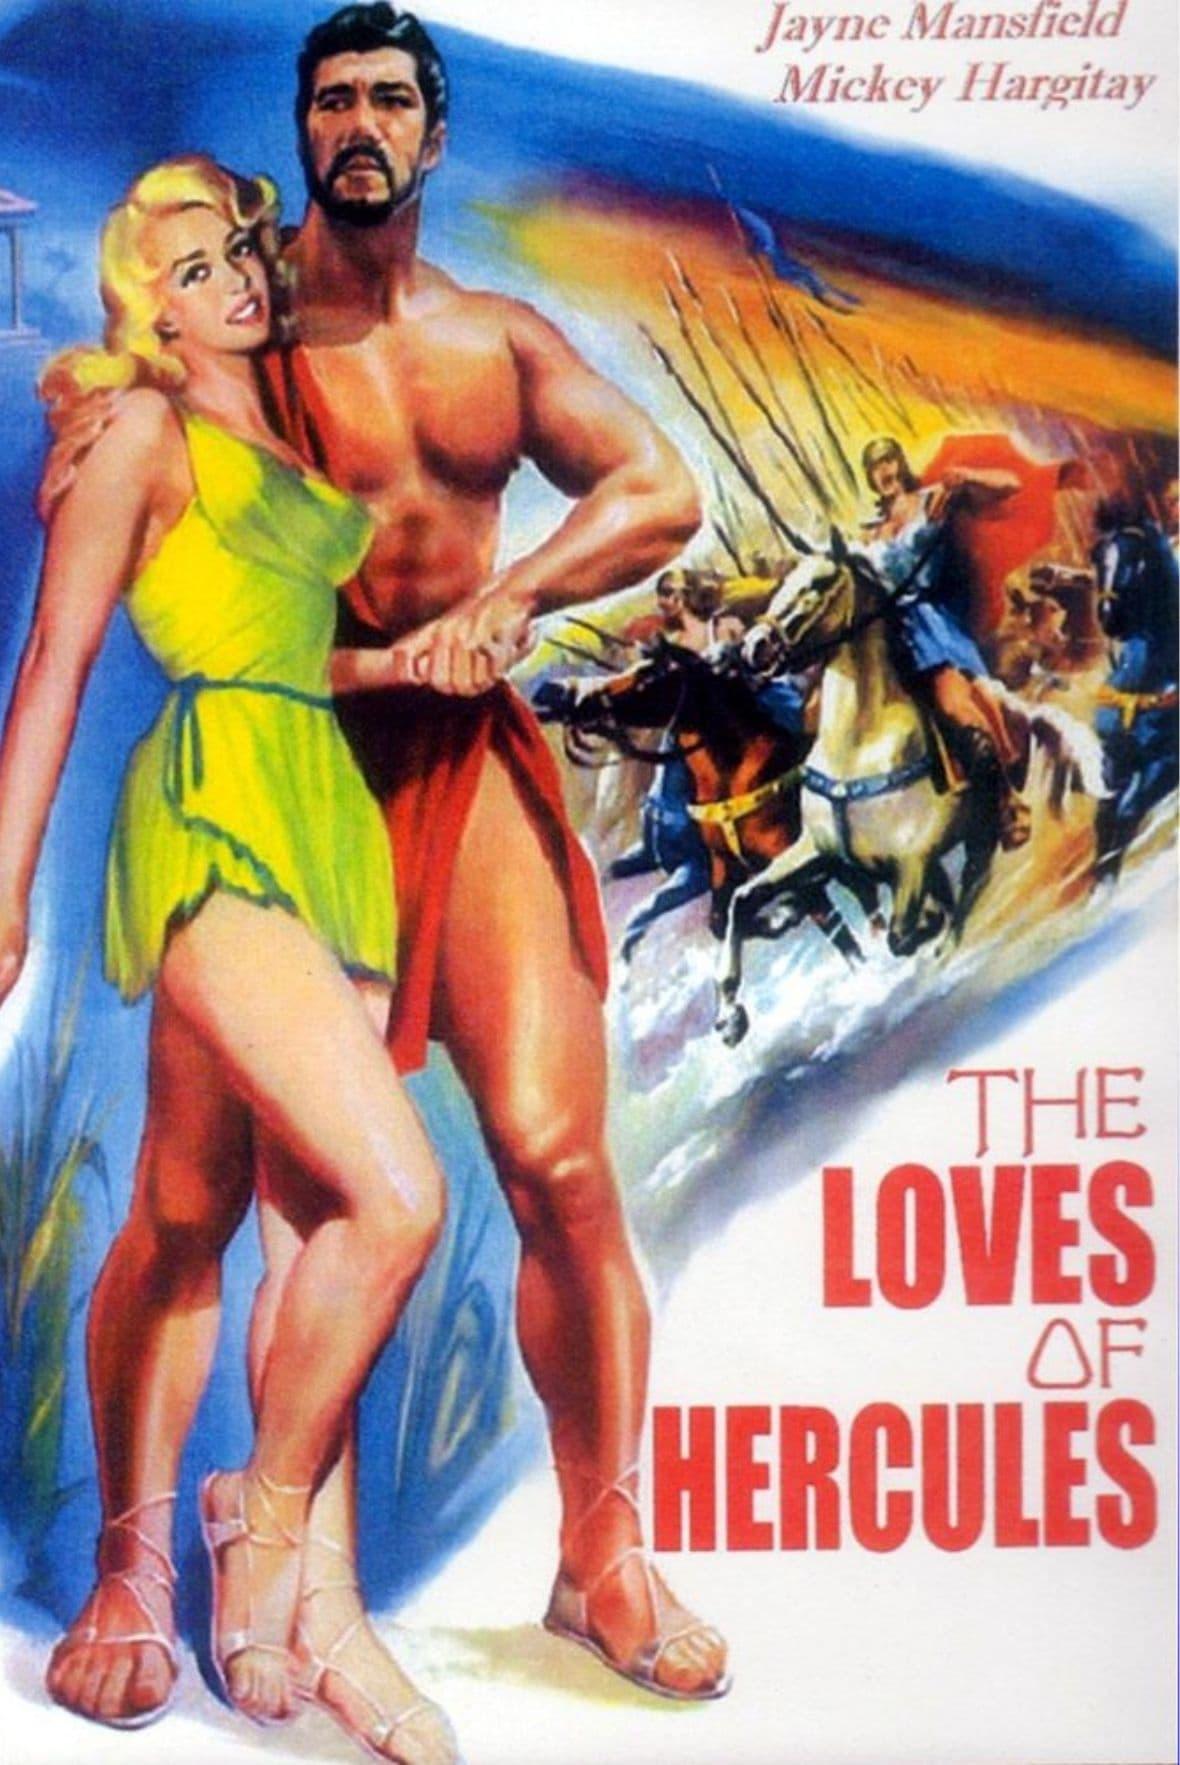 The Loves of Hercules poster